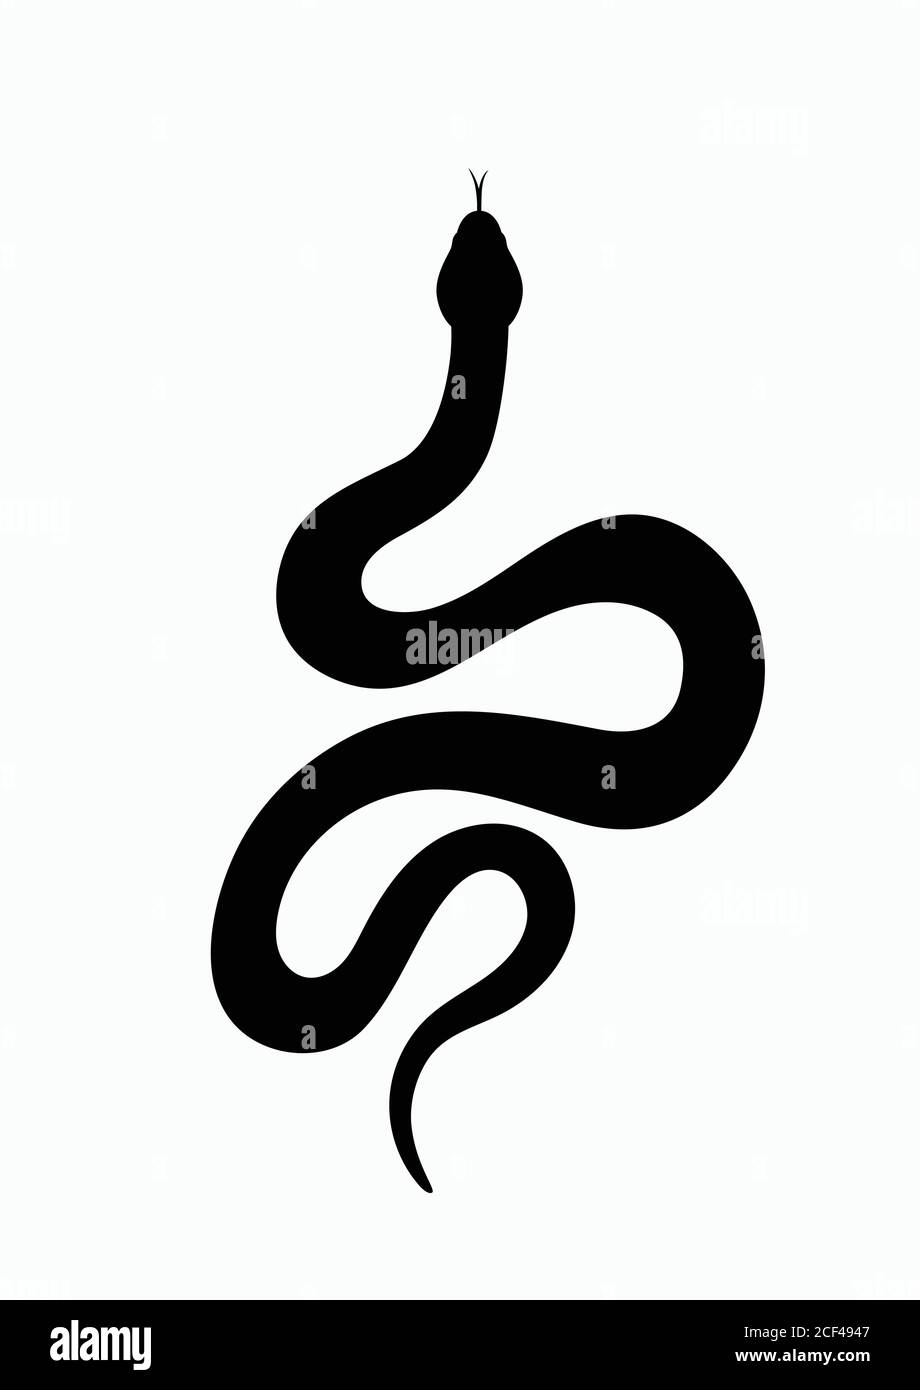 Black silhouette snake. Isolated symbol or icon snake on white background. Abstract sign snake. Vector illustration Stock Vector